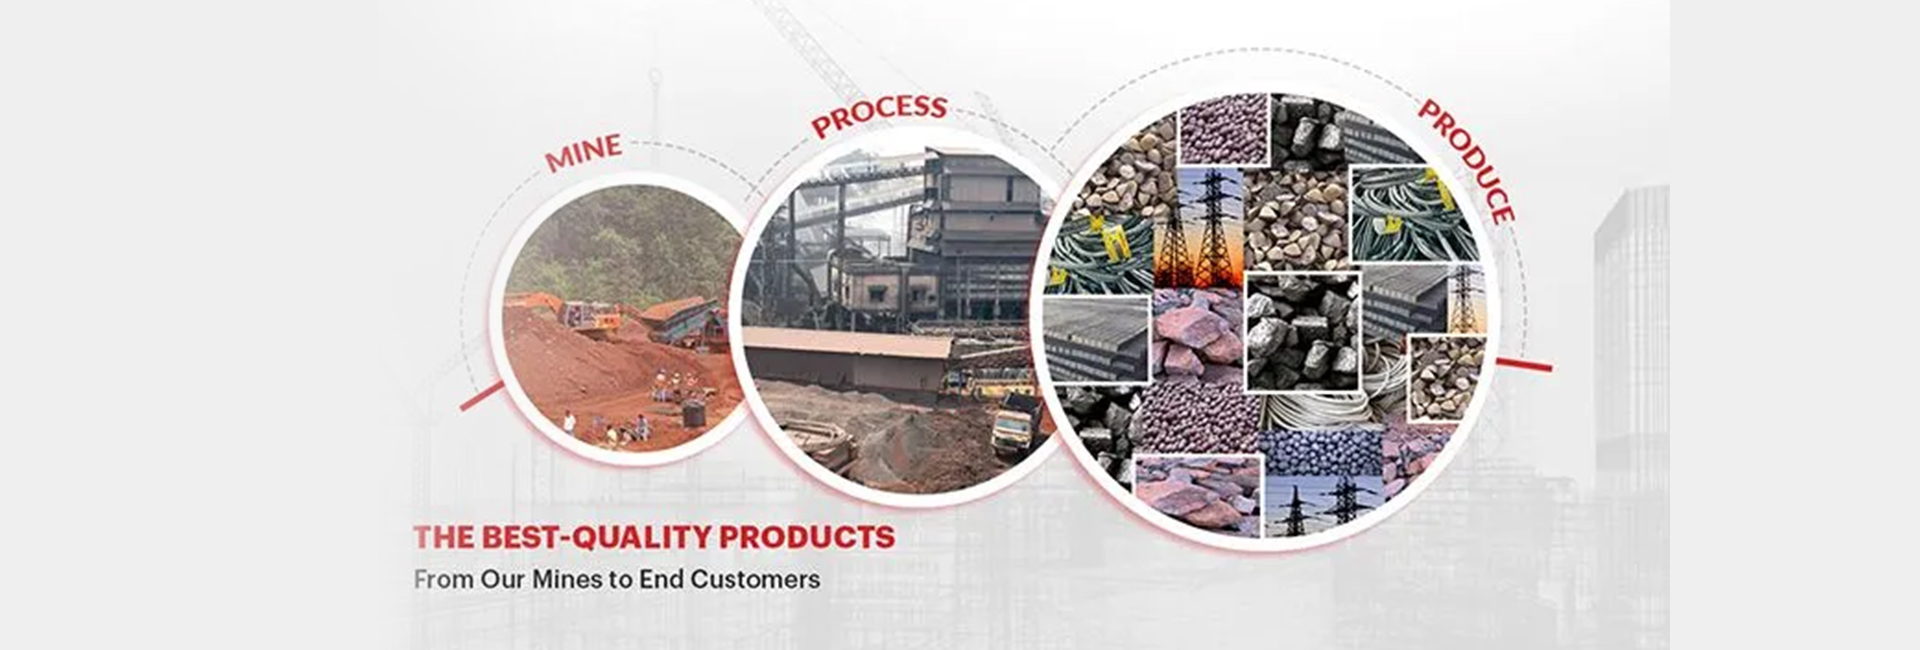 Mining – Processing – Manufacturing products